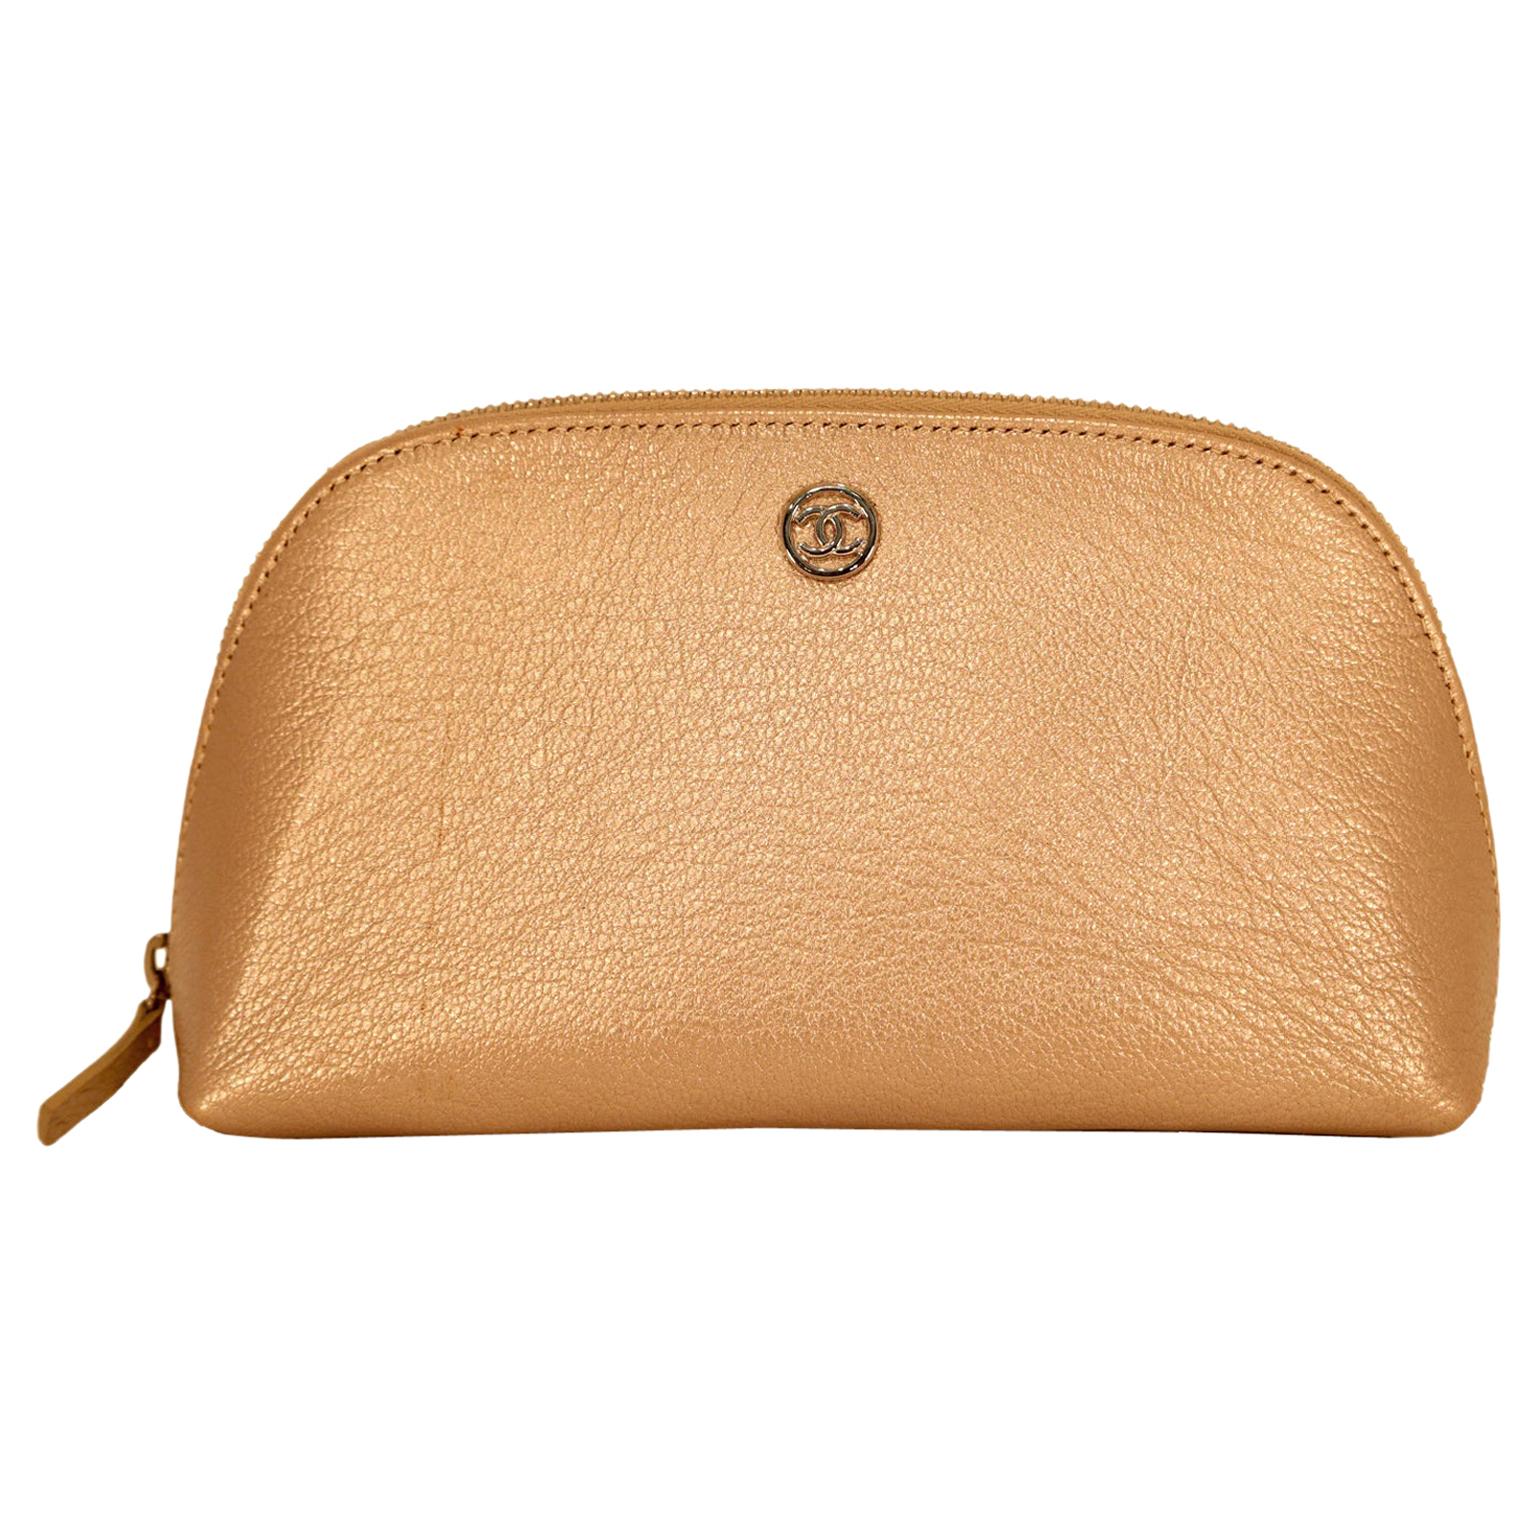 Chanel Rose Gold Leather Pouch 